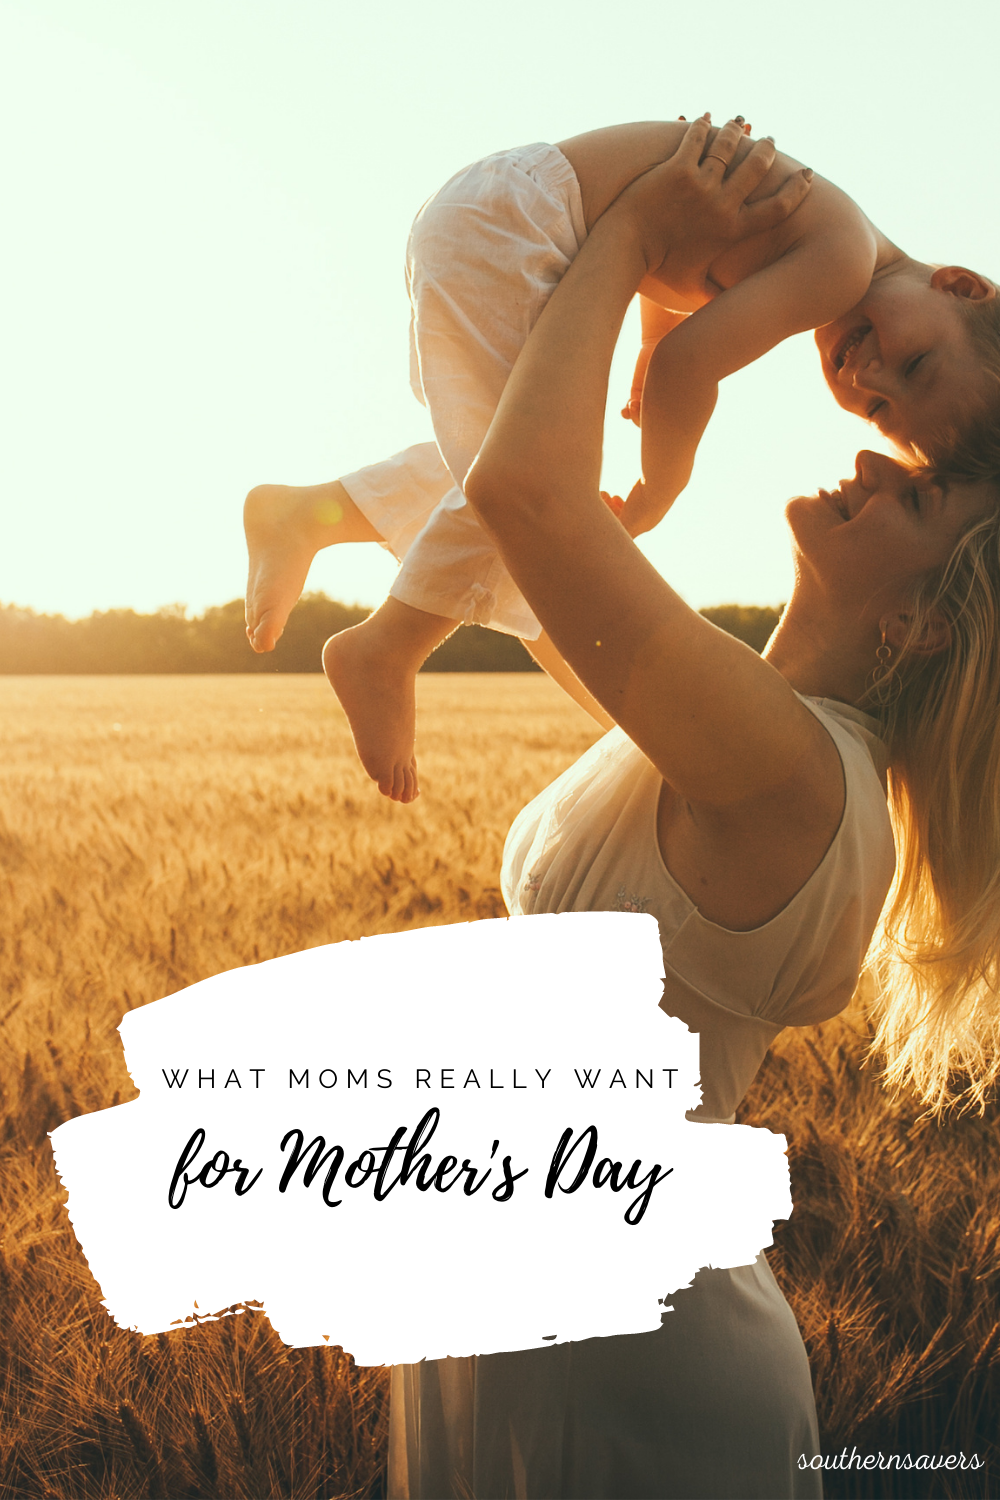 Stumped on what to get mom for Mother's Day? Based on the most common responses, she wants a break, good food, and a maid. 